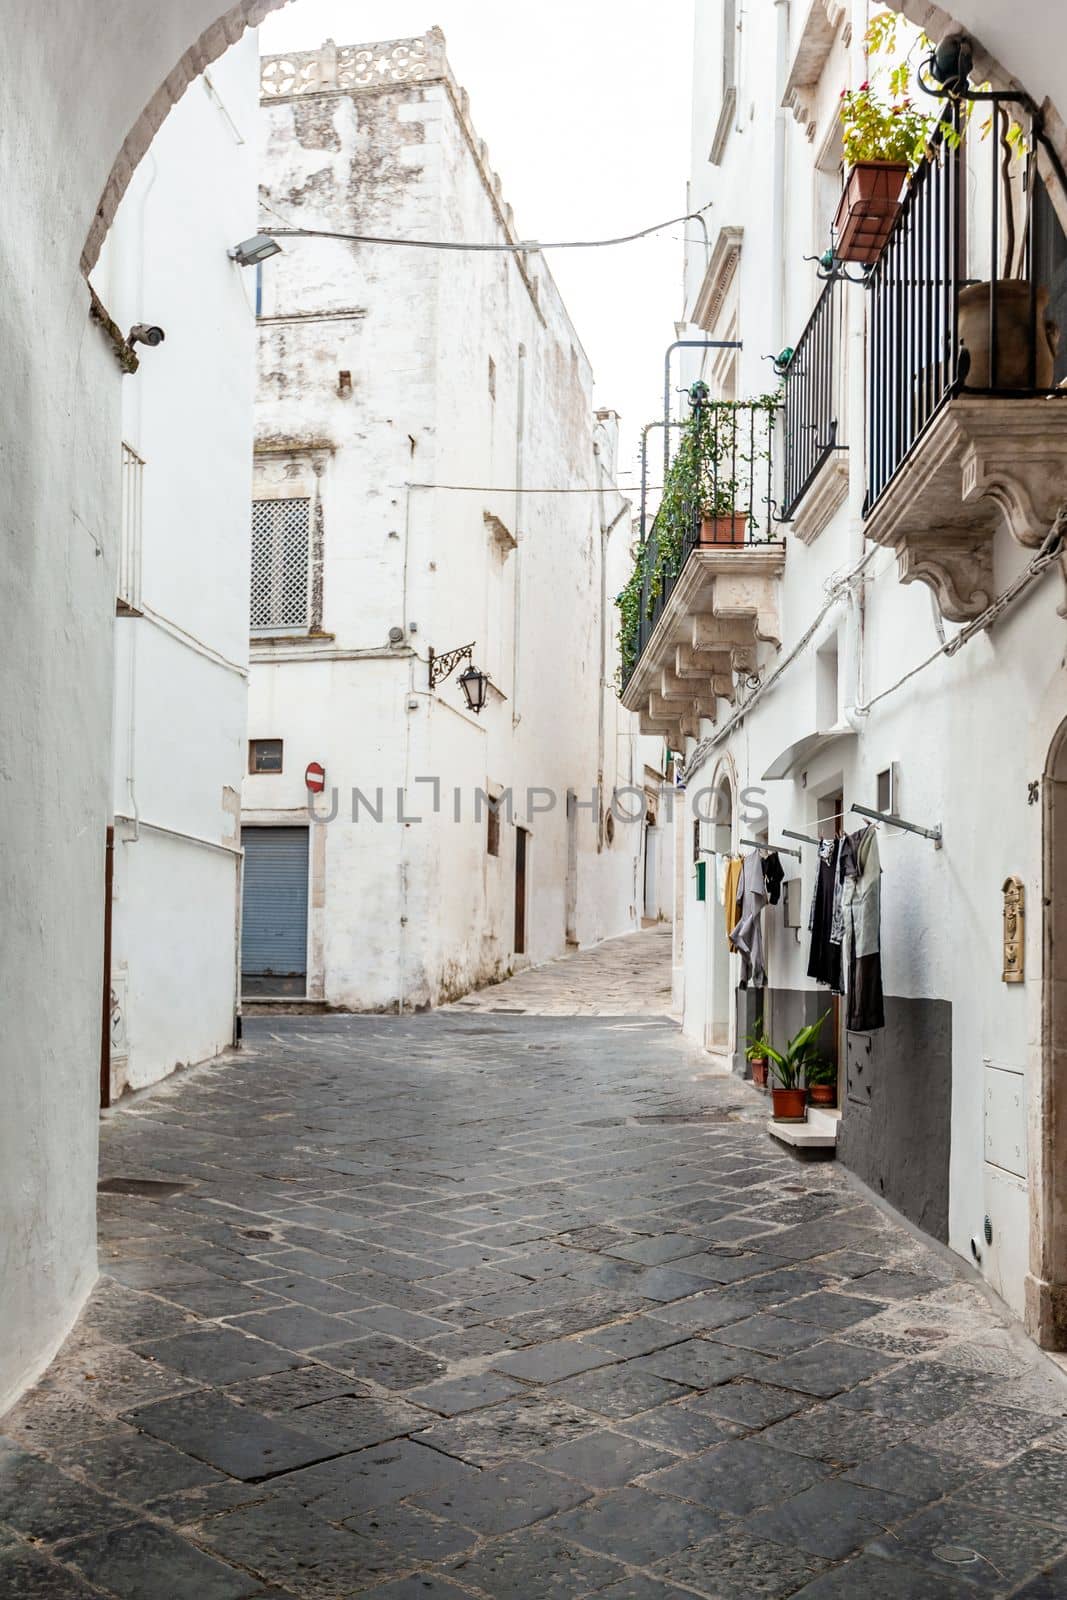 View from an archway on the empty streets of old town Martina Franca with a charming houses painted in white among greenery. Wonderful day in a tourist town, Apulia, Southern Italy.